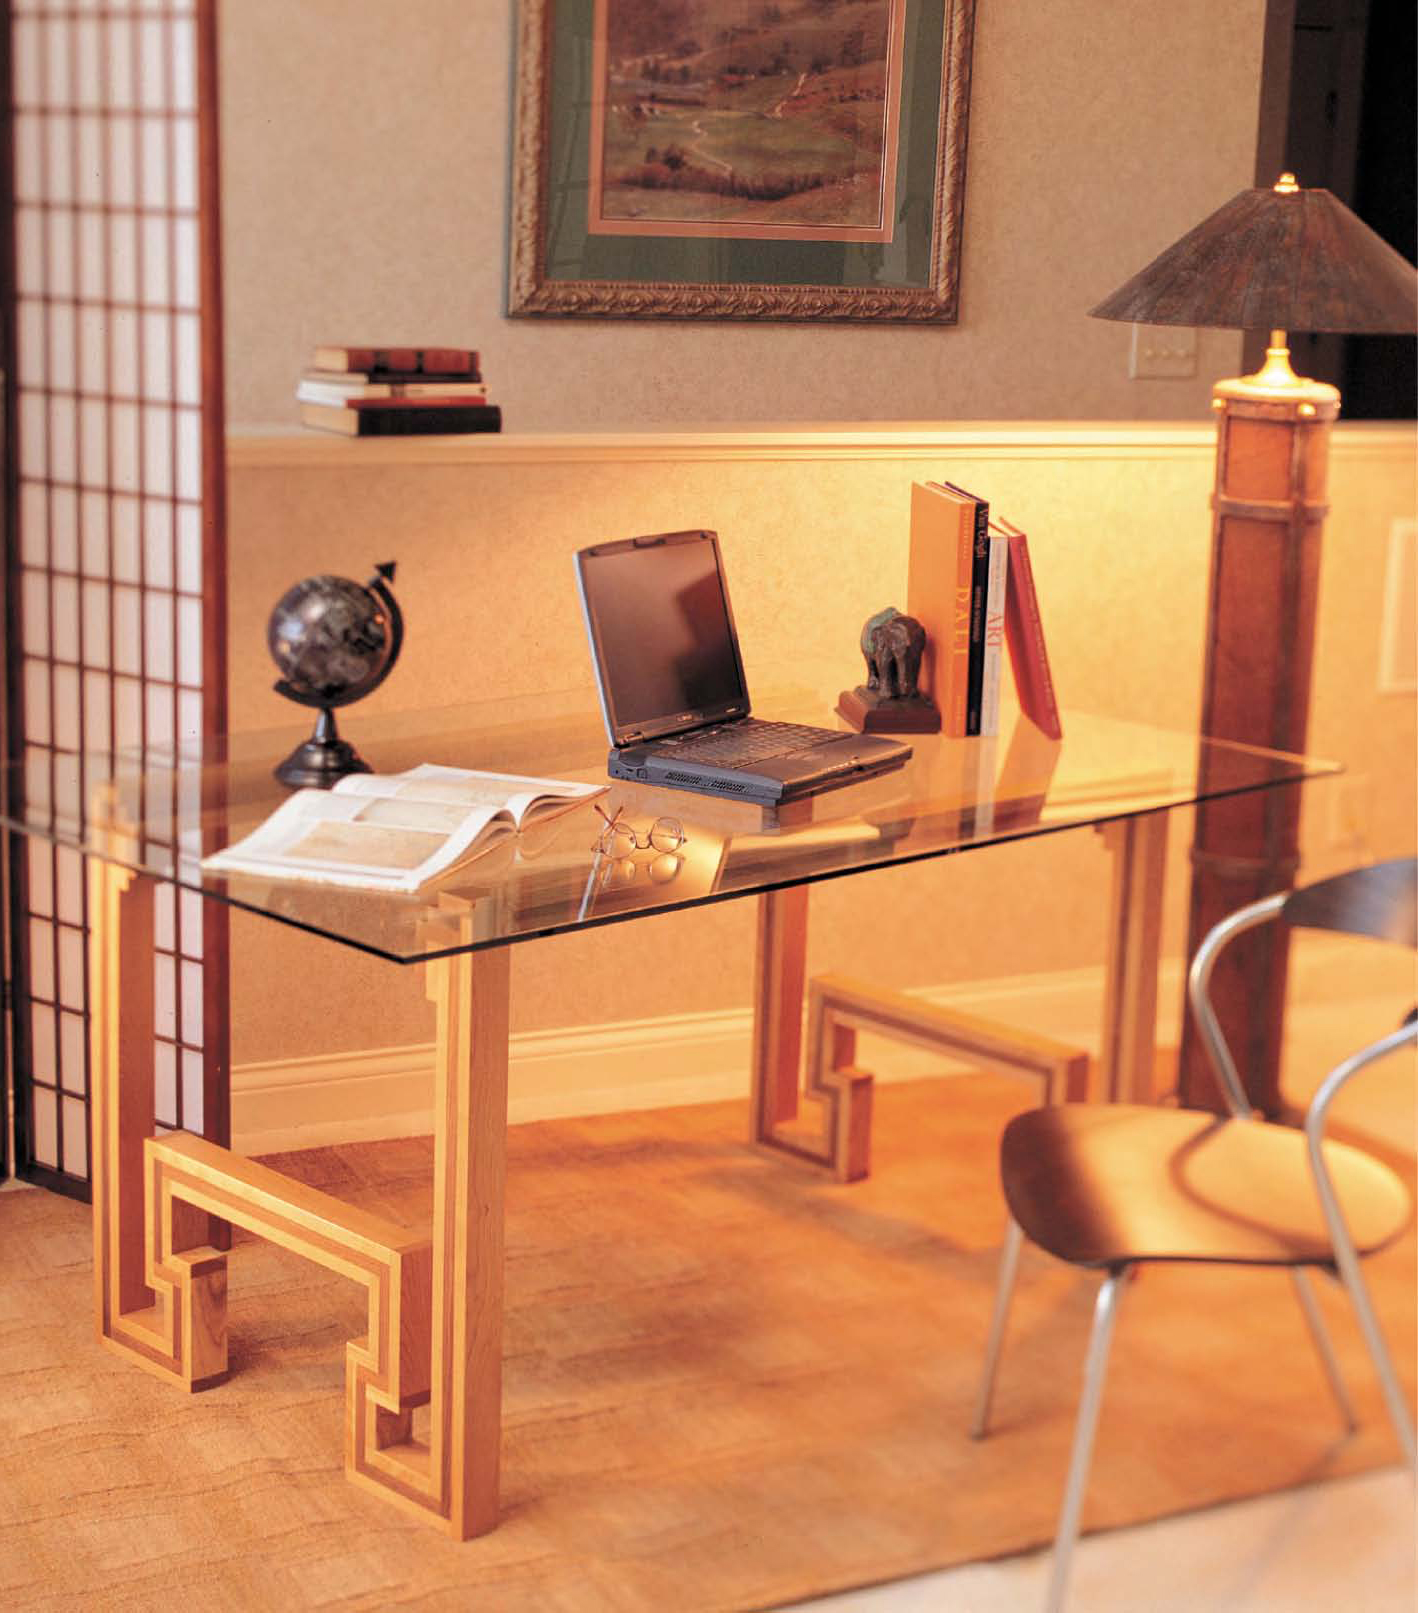 how to build a desk: a free ebook popular woodworking